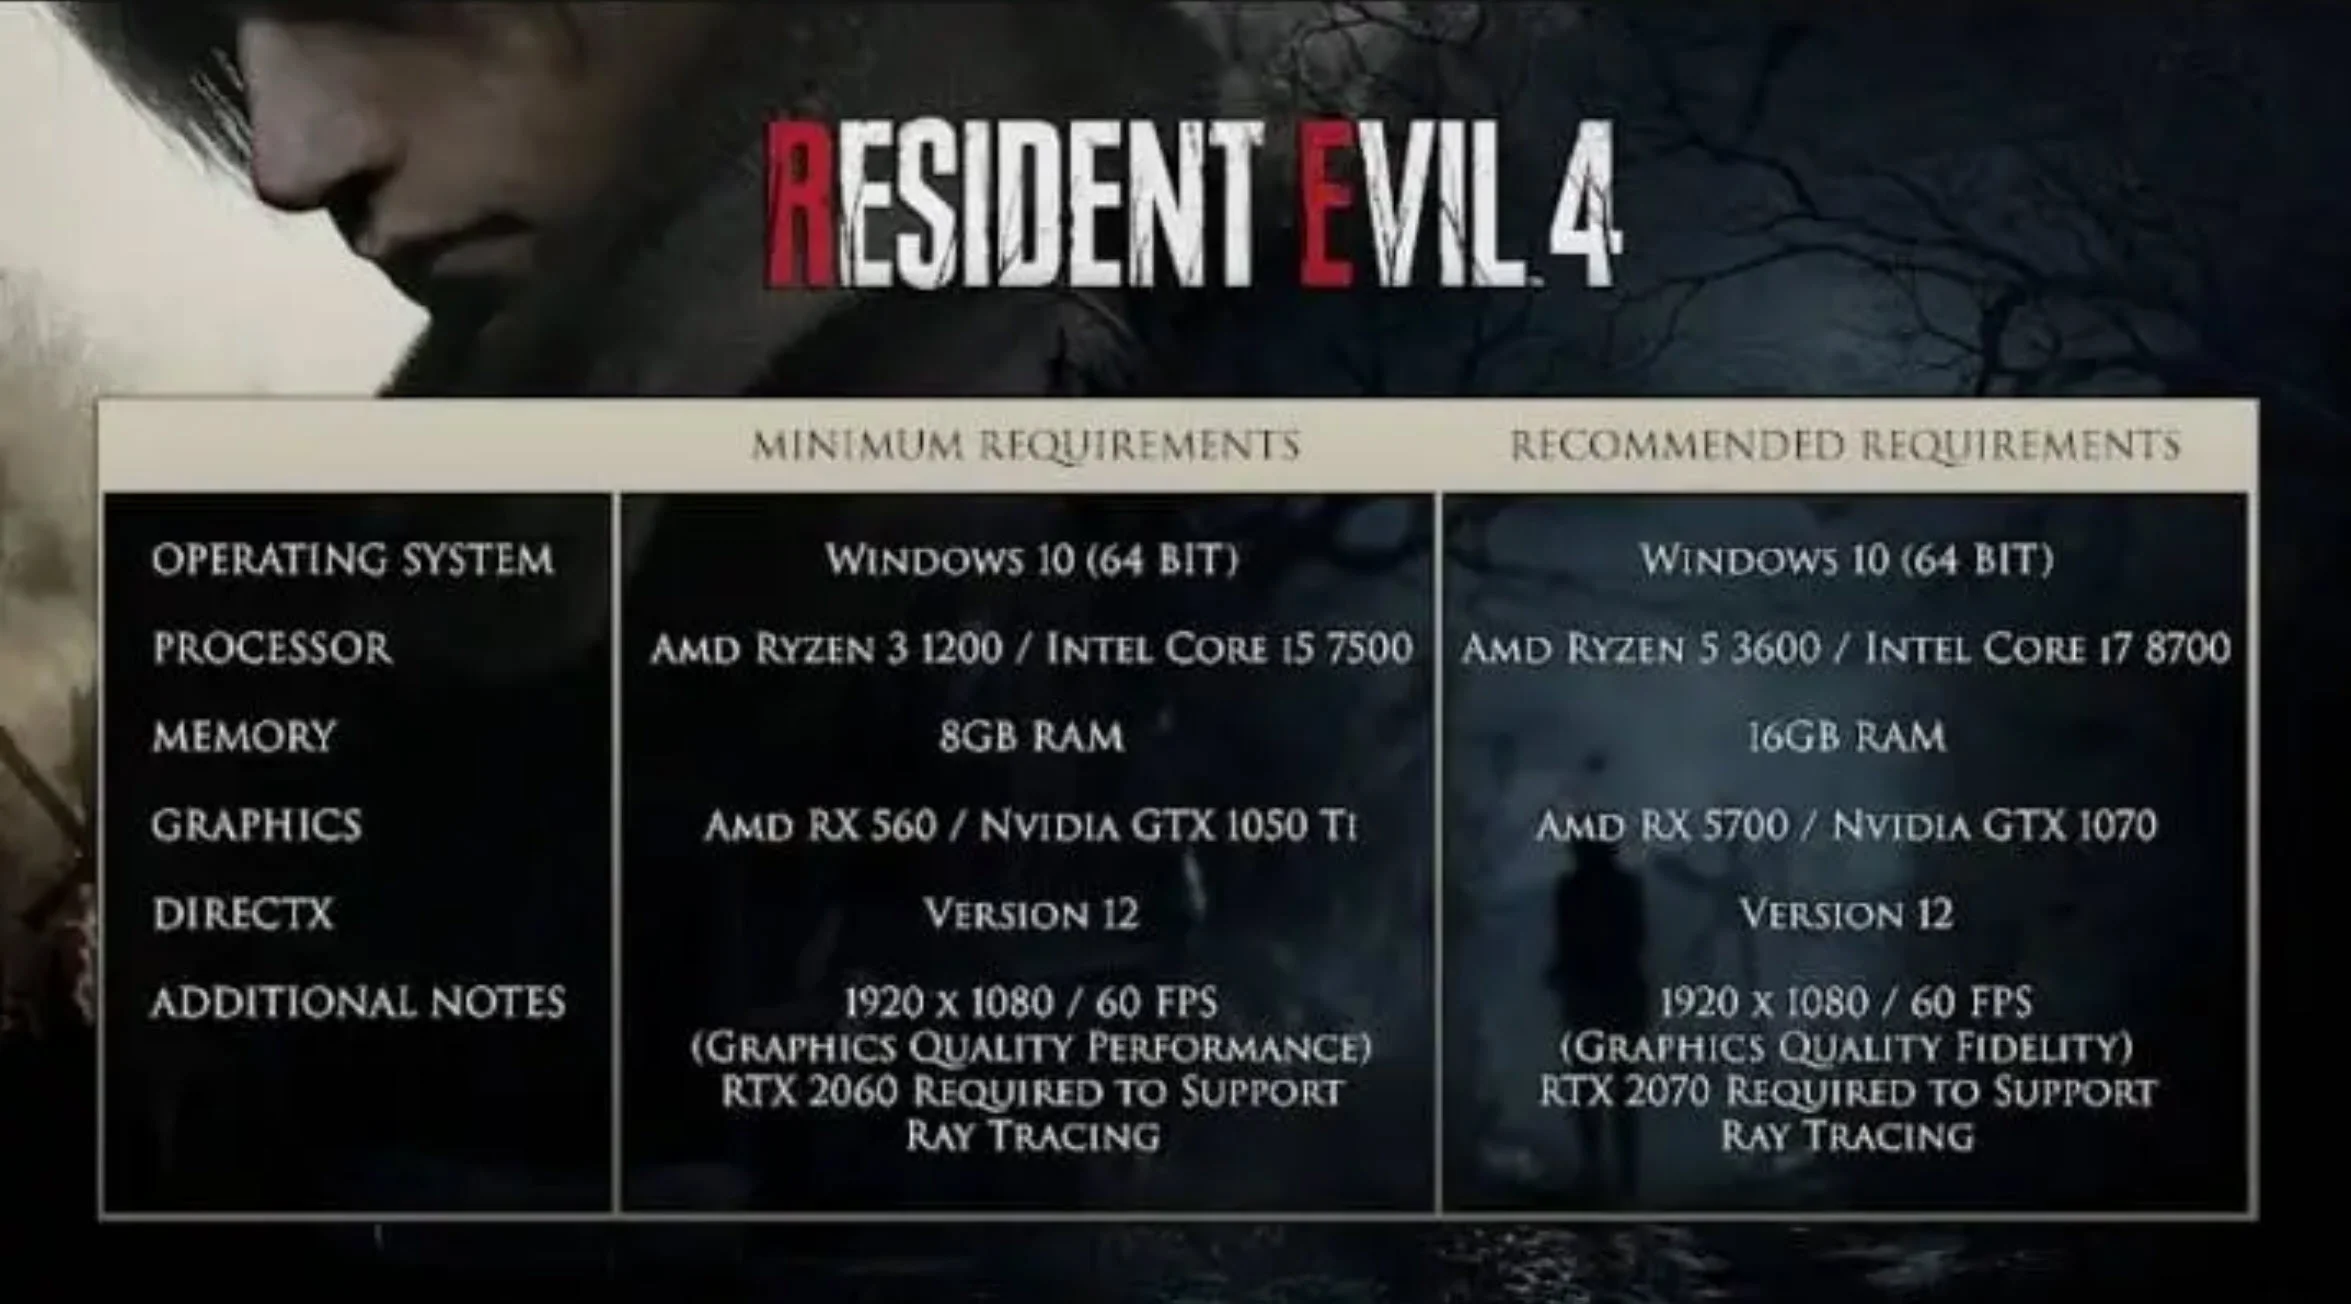 Resident Evil 4 System Requirements - Minimum, Recommended